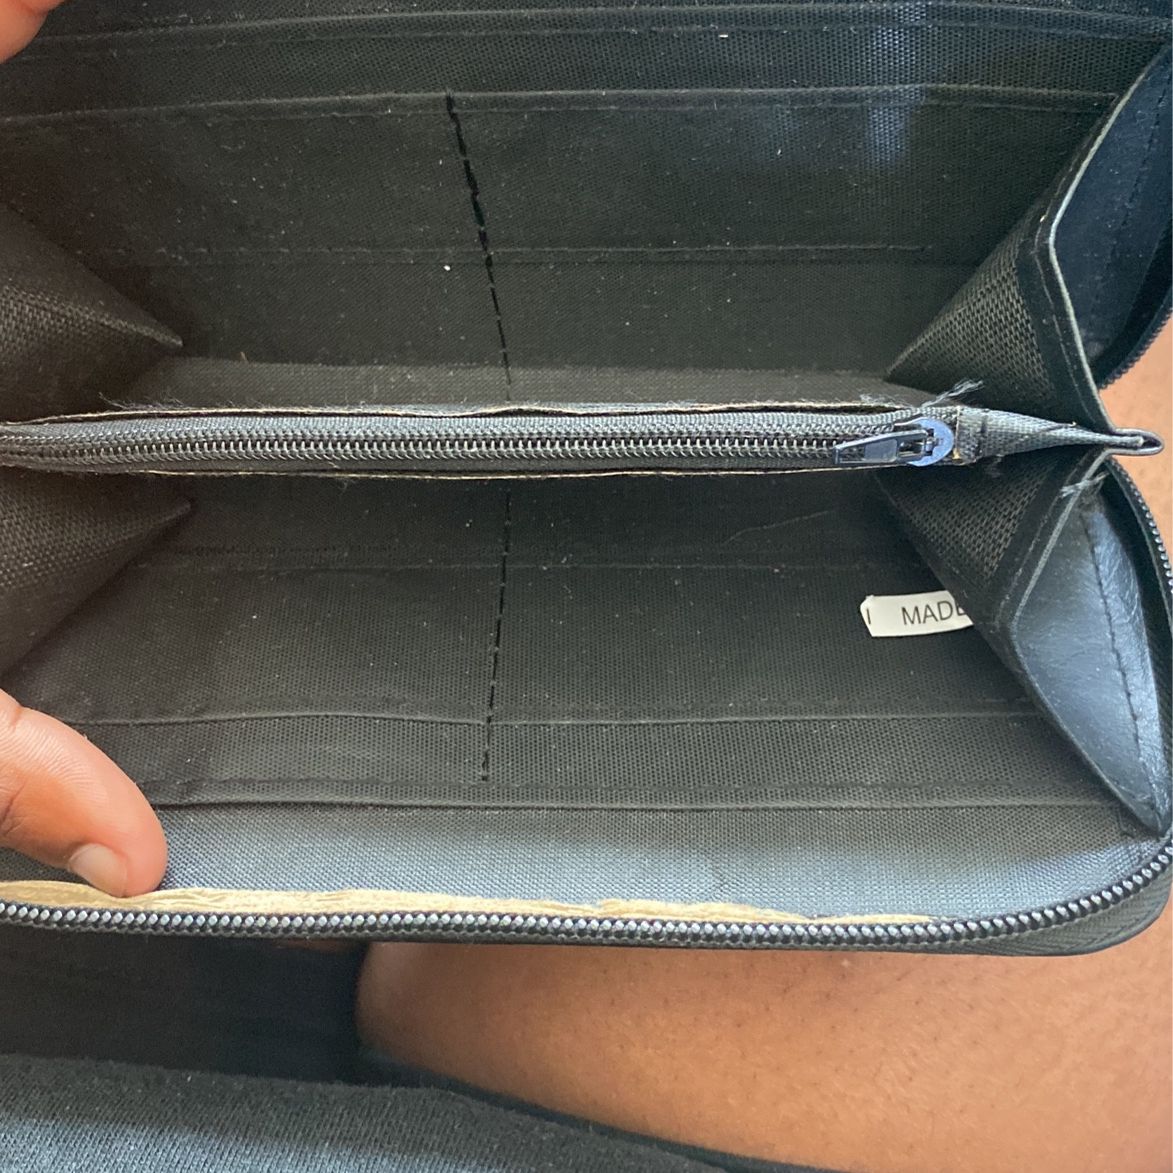 New and Used Gucci wallet for Sale in South Miami, FL - OfferUp